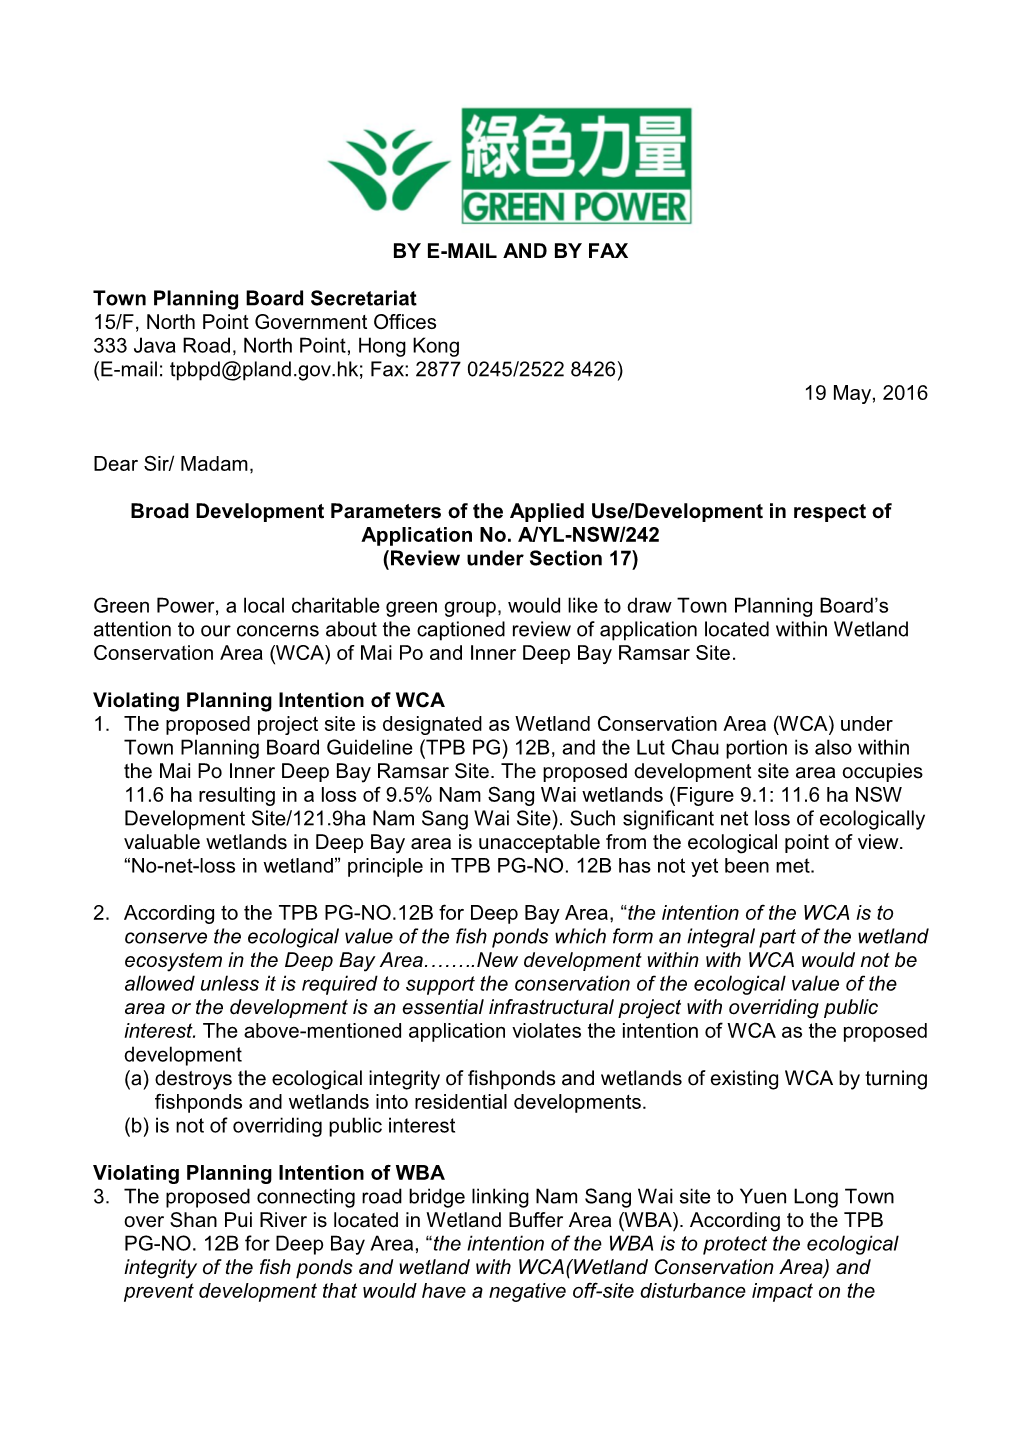 Letter to Town Planning Board Commenting on the Review